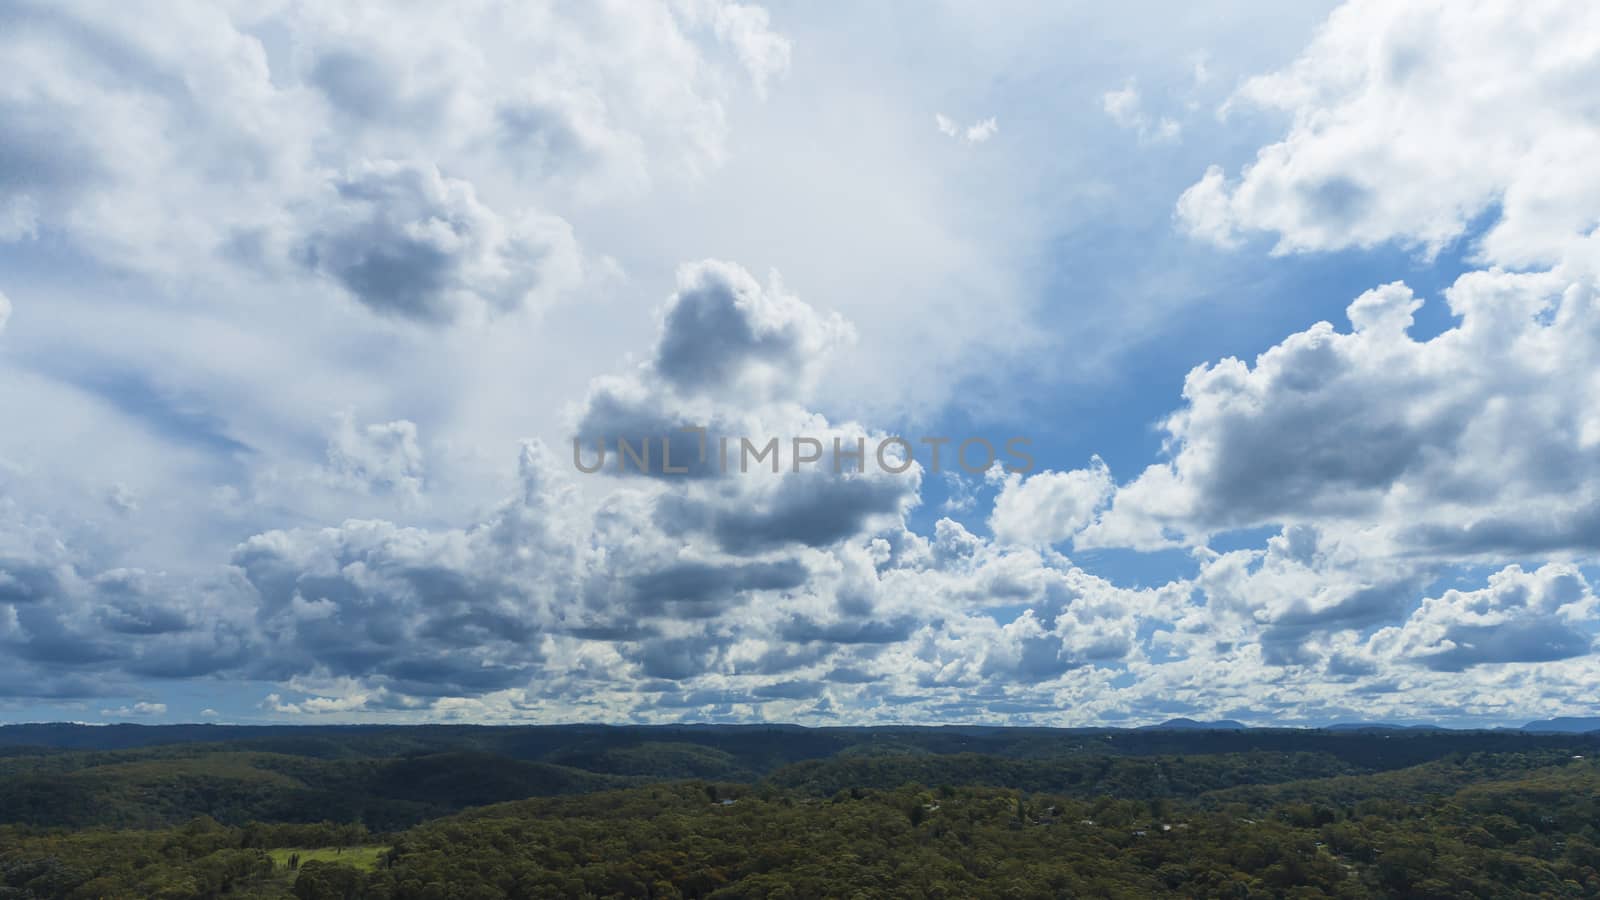 Clouds over The Blue Mountains in Australia by WittkePhotos